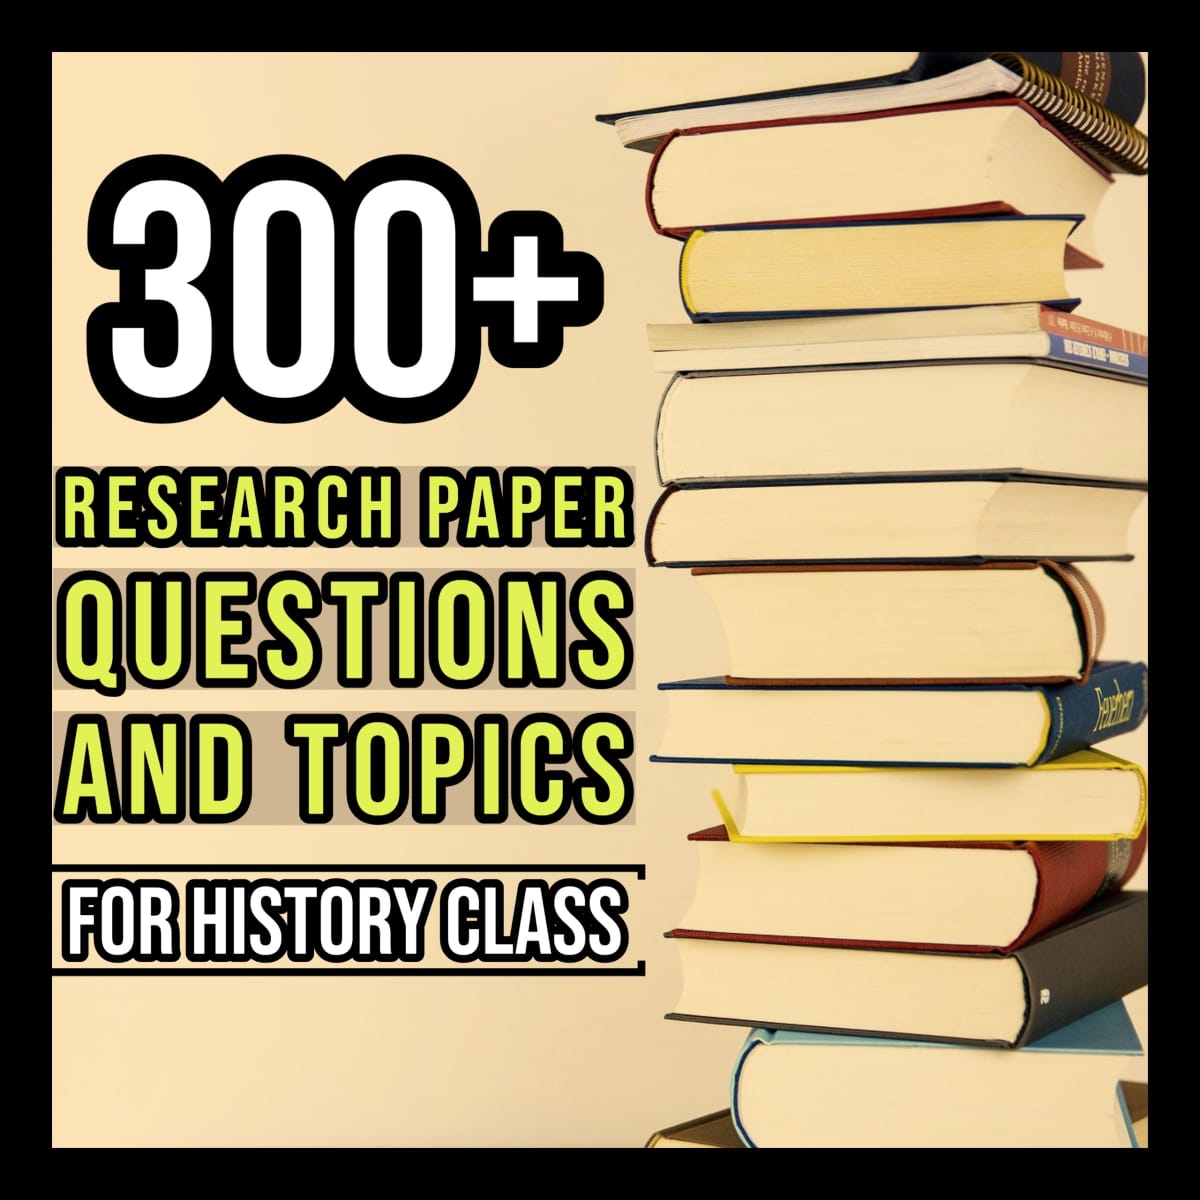 world history research paper topics